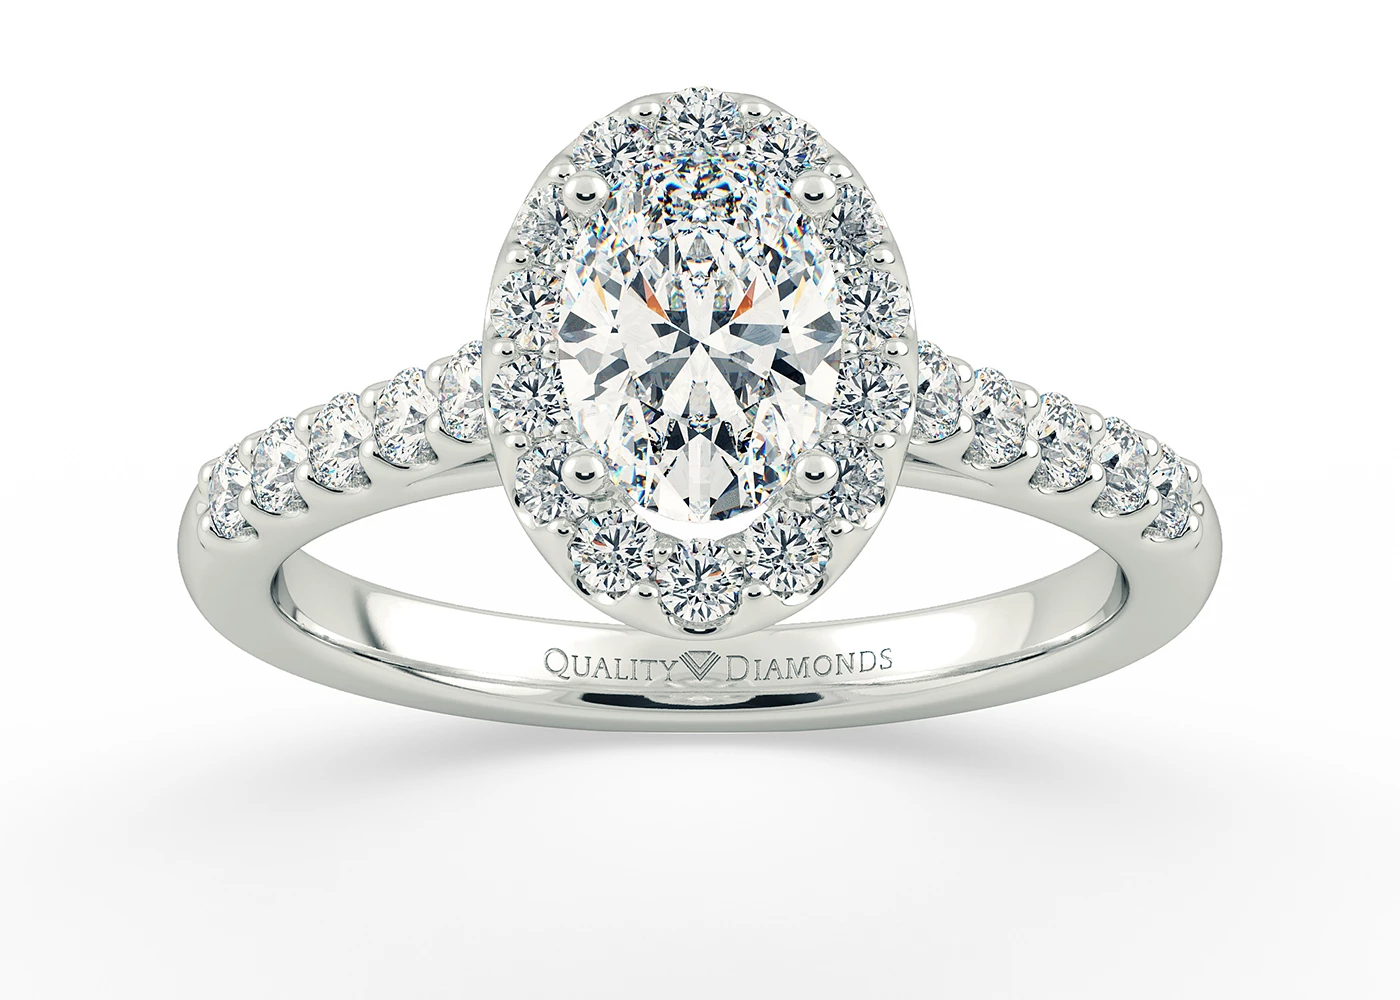 Two Carat Halo Oval Diamond Ring in 18K White Gold